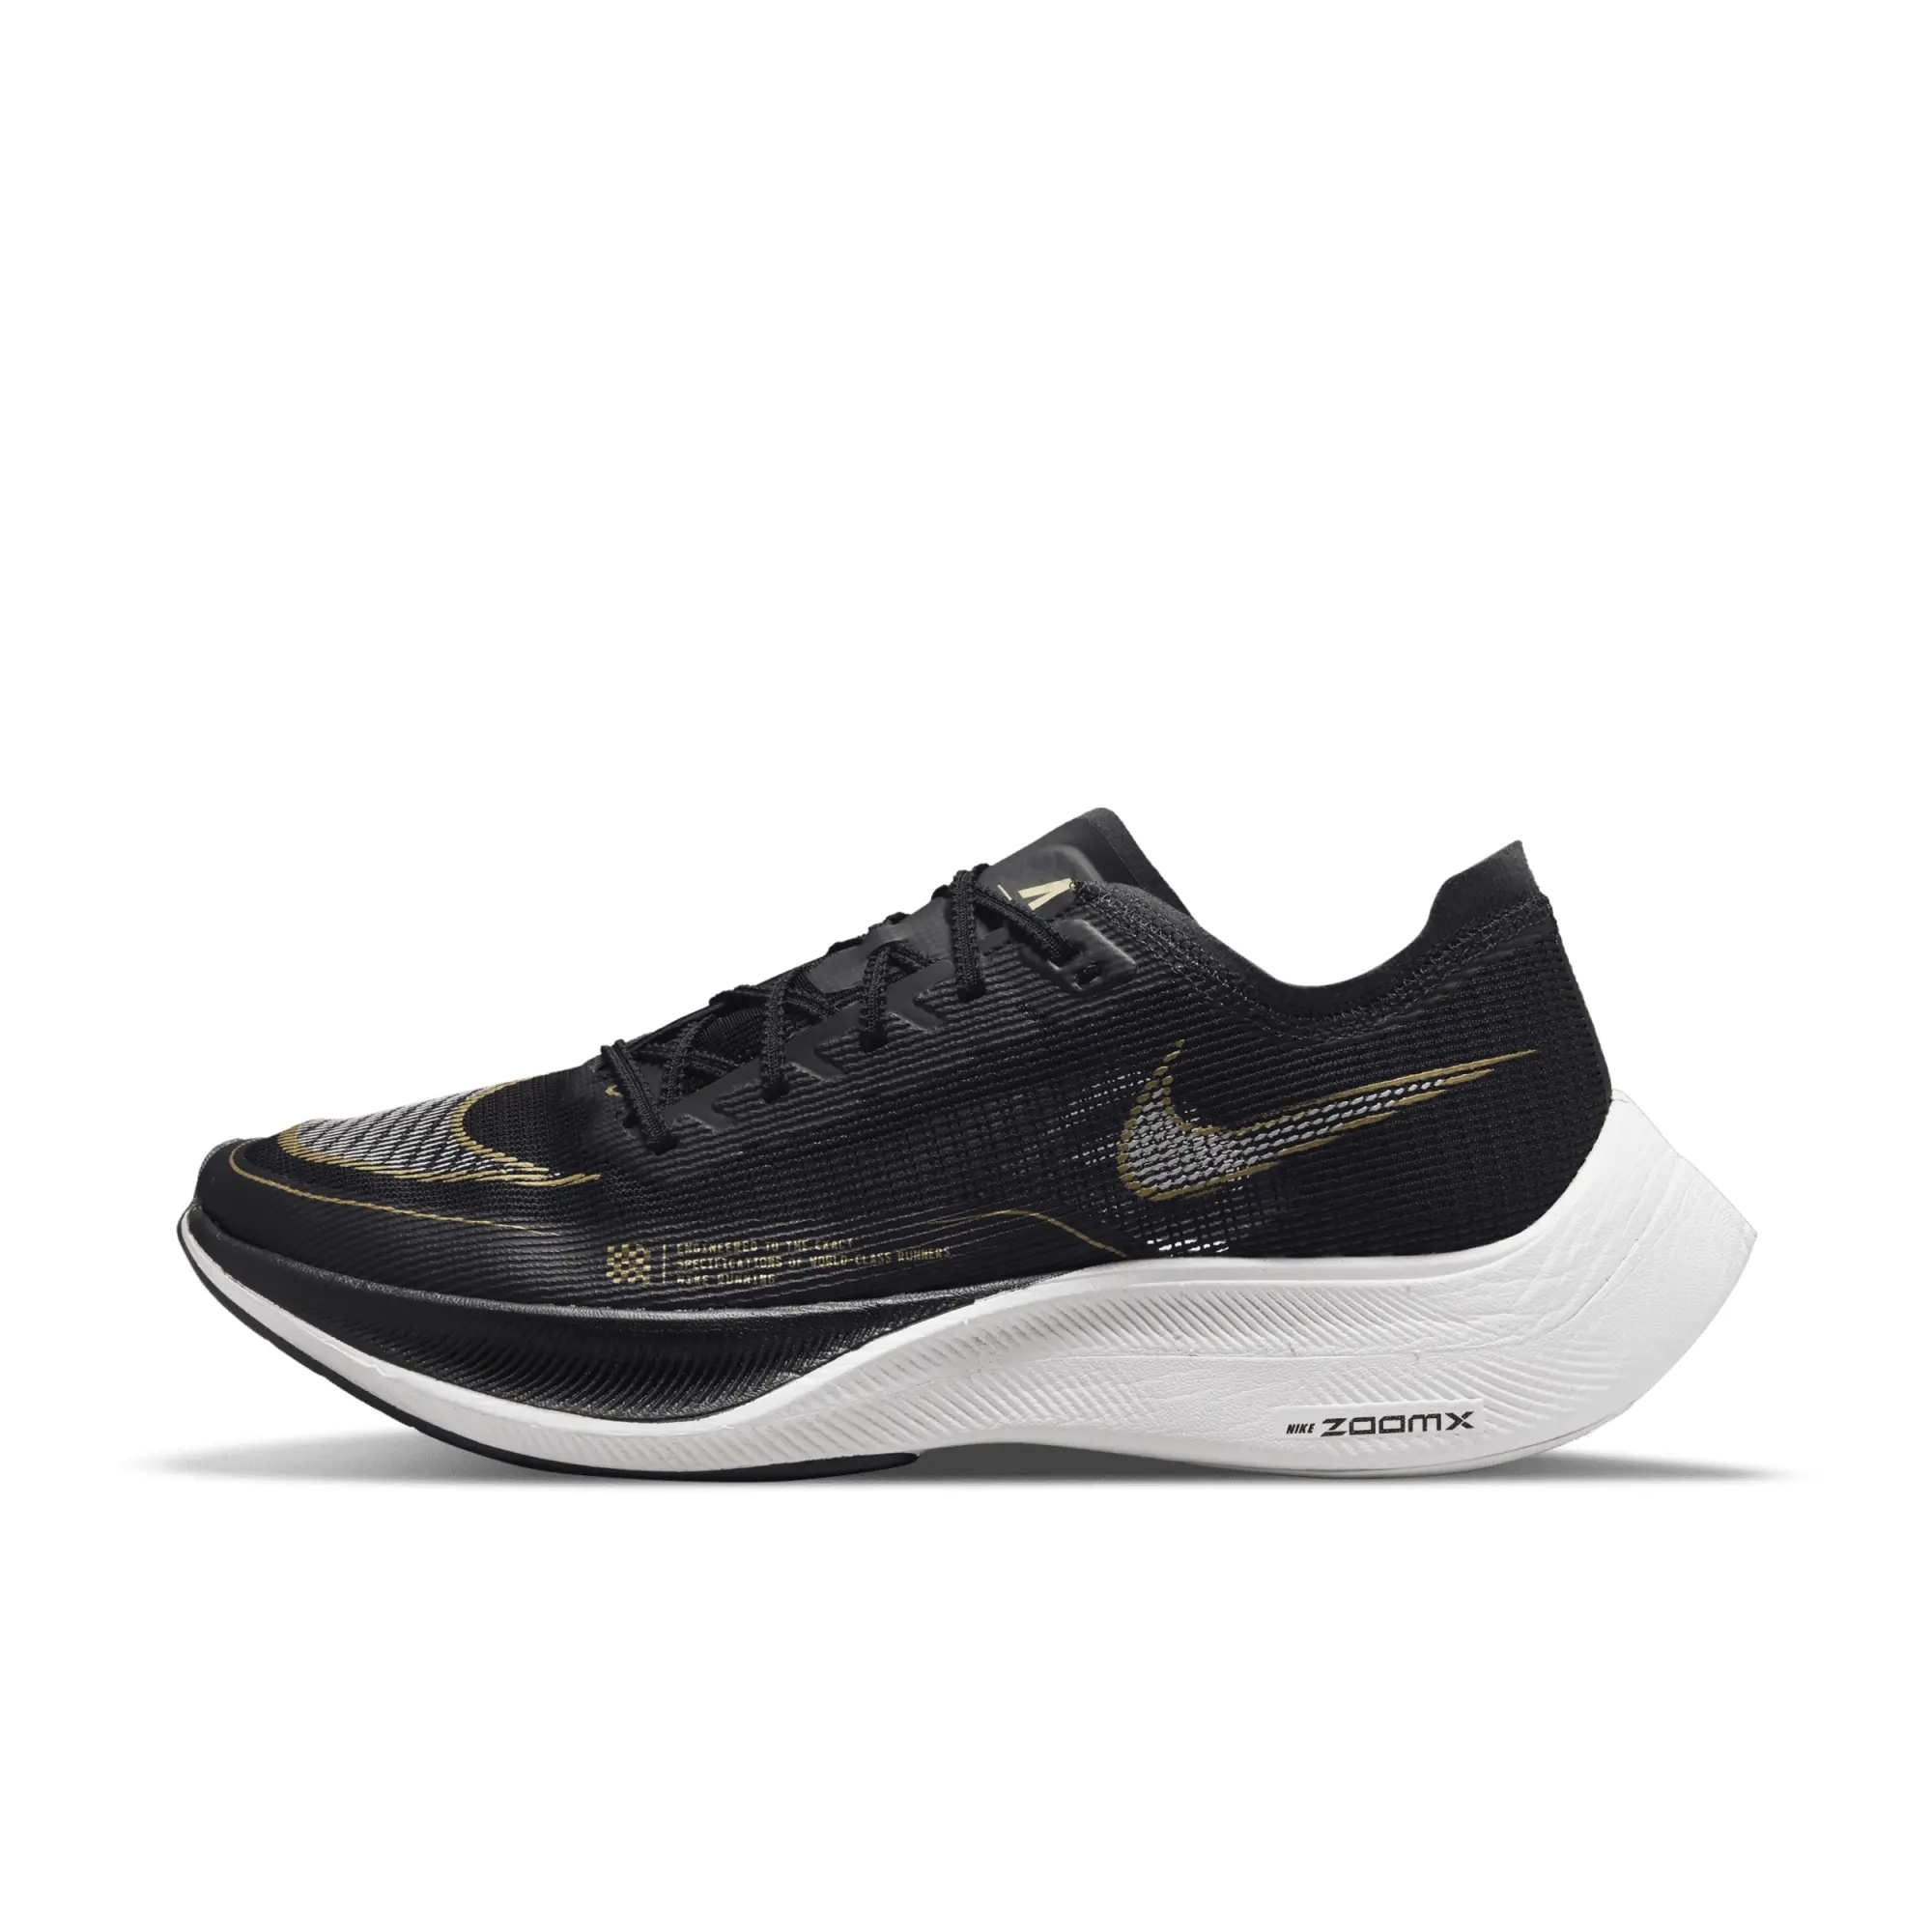 Nike ZoomX Vaporfly Next% 2 Shoes